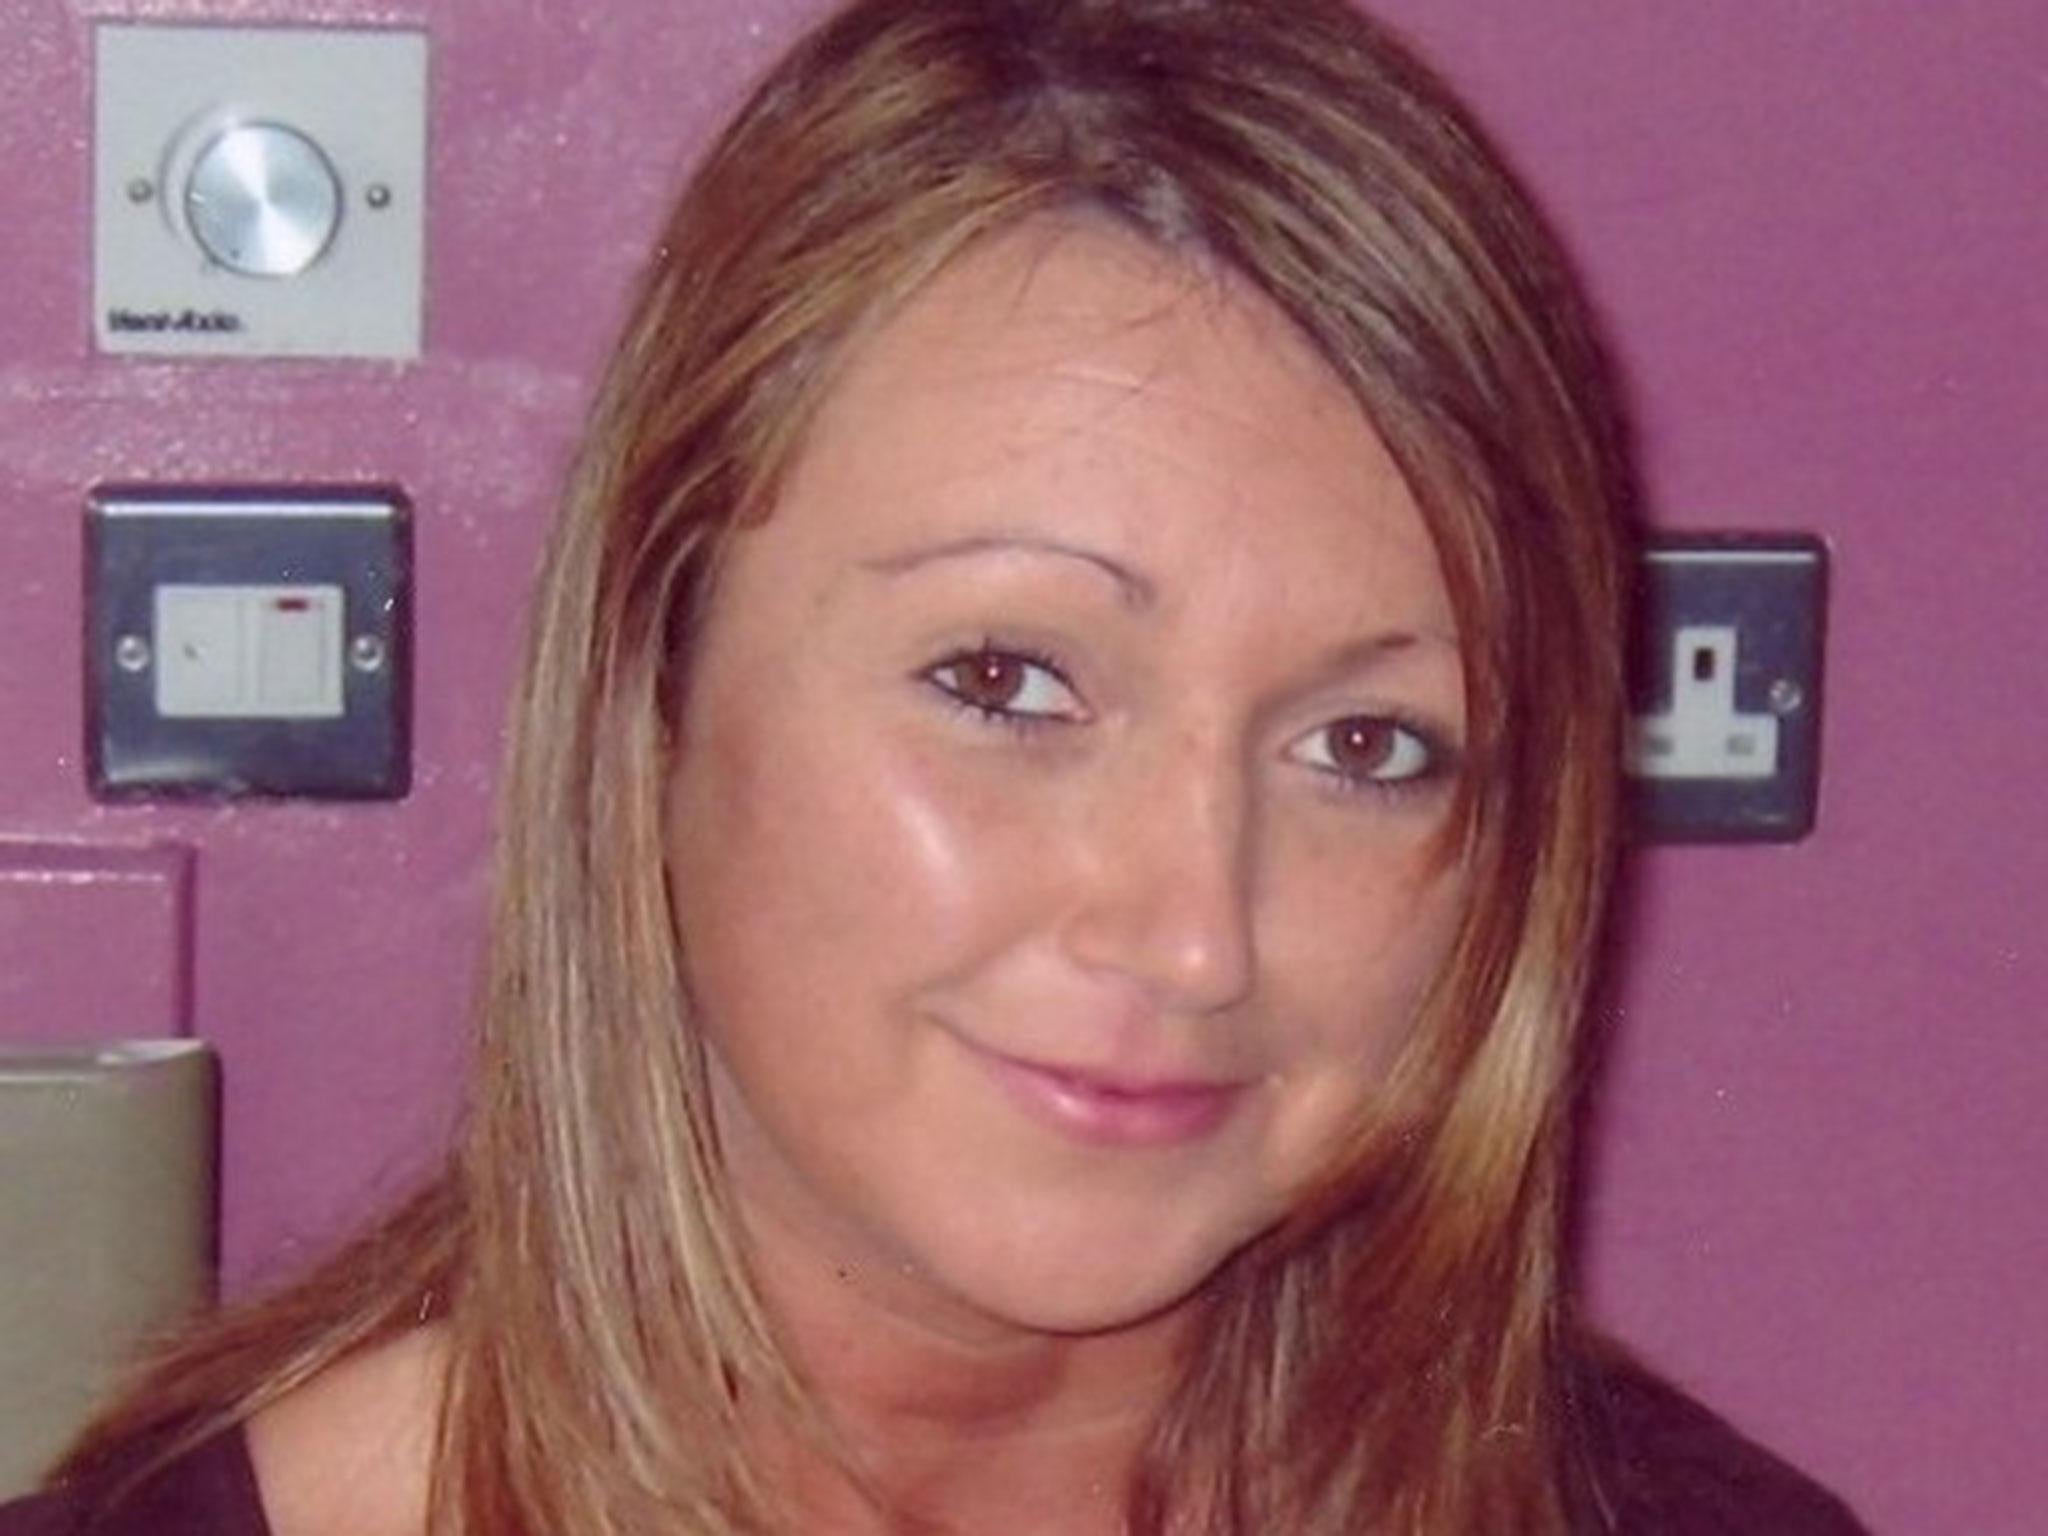 Claudia Lawrence disappeared on 18 March 2009